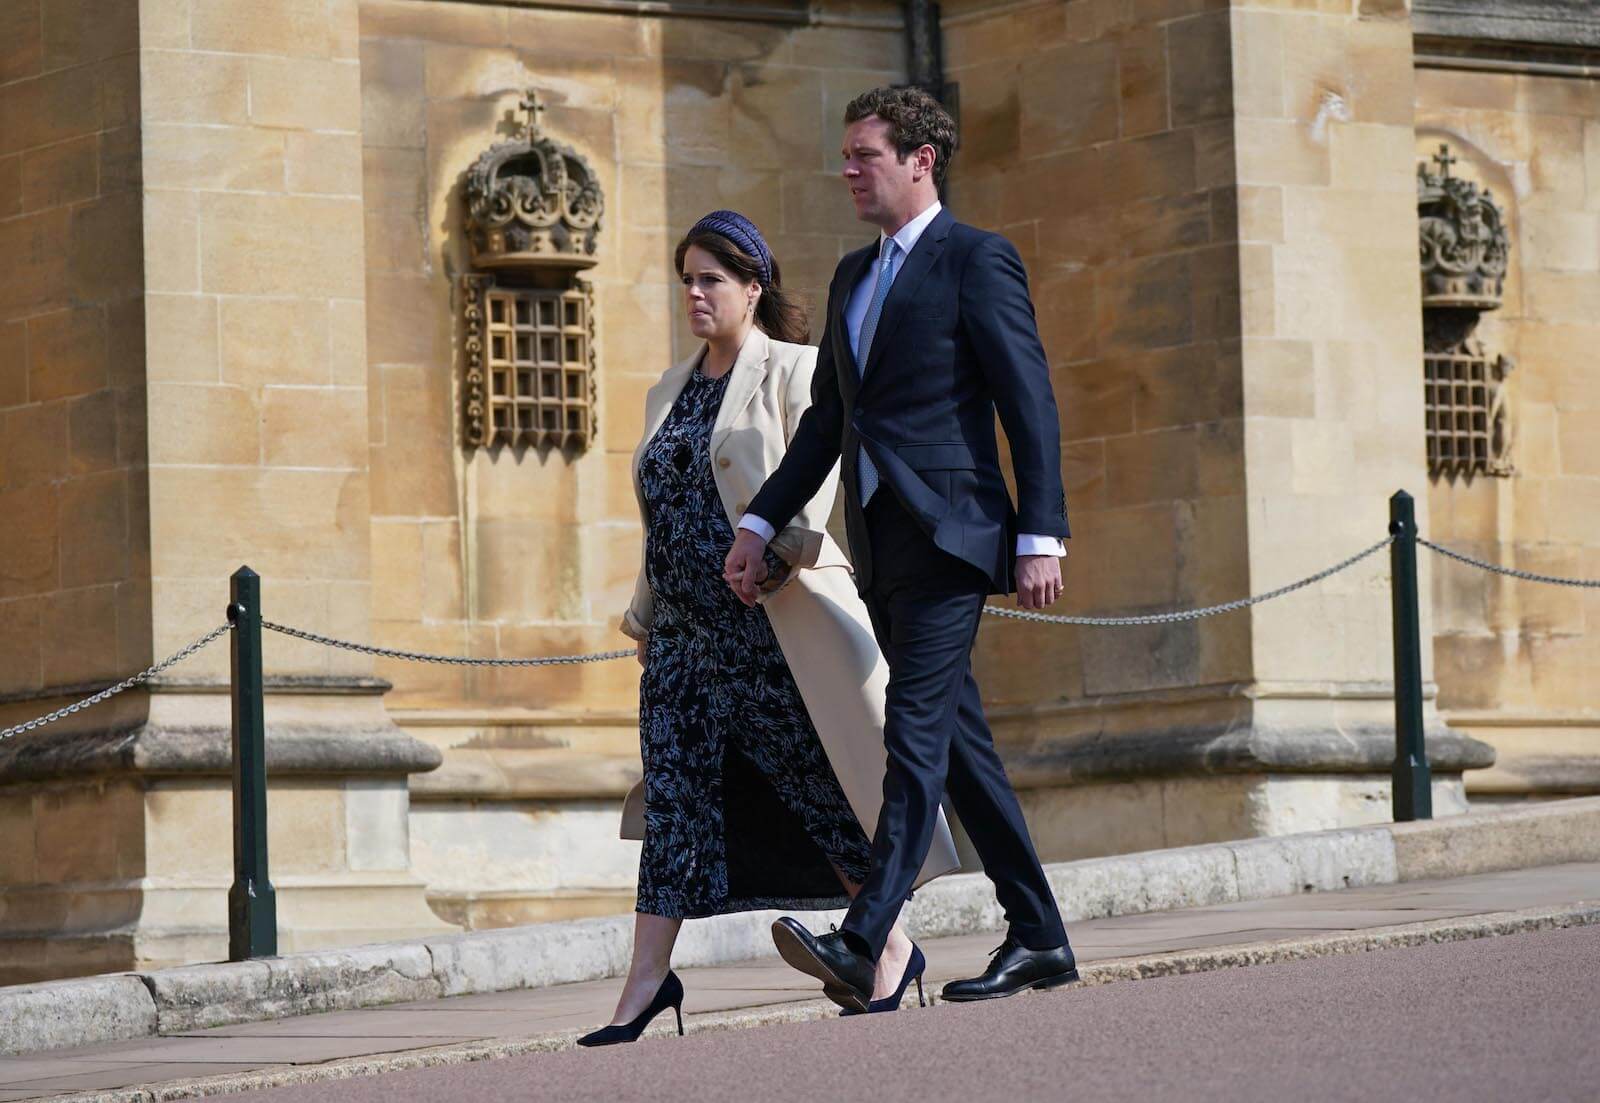 Royal family members Princess Eugenie and Jack Brooksbank walking together on Easter Sunday